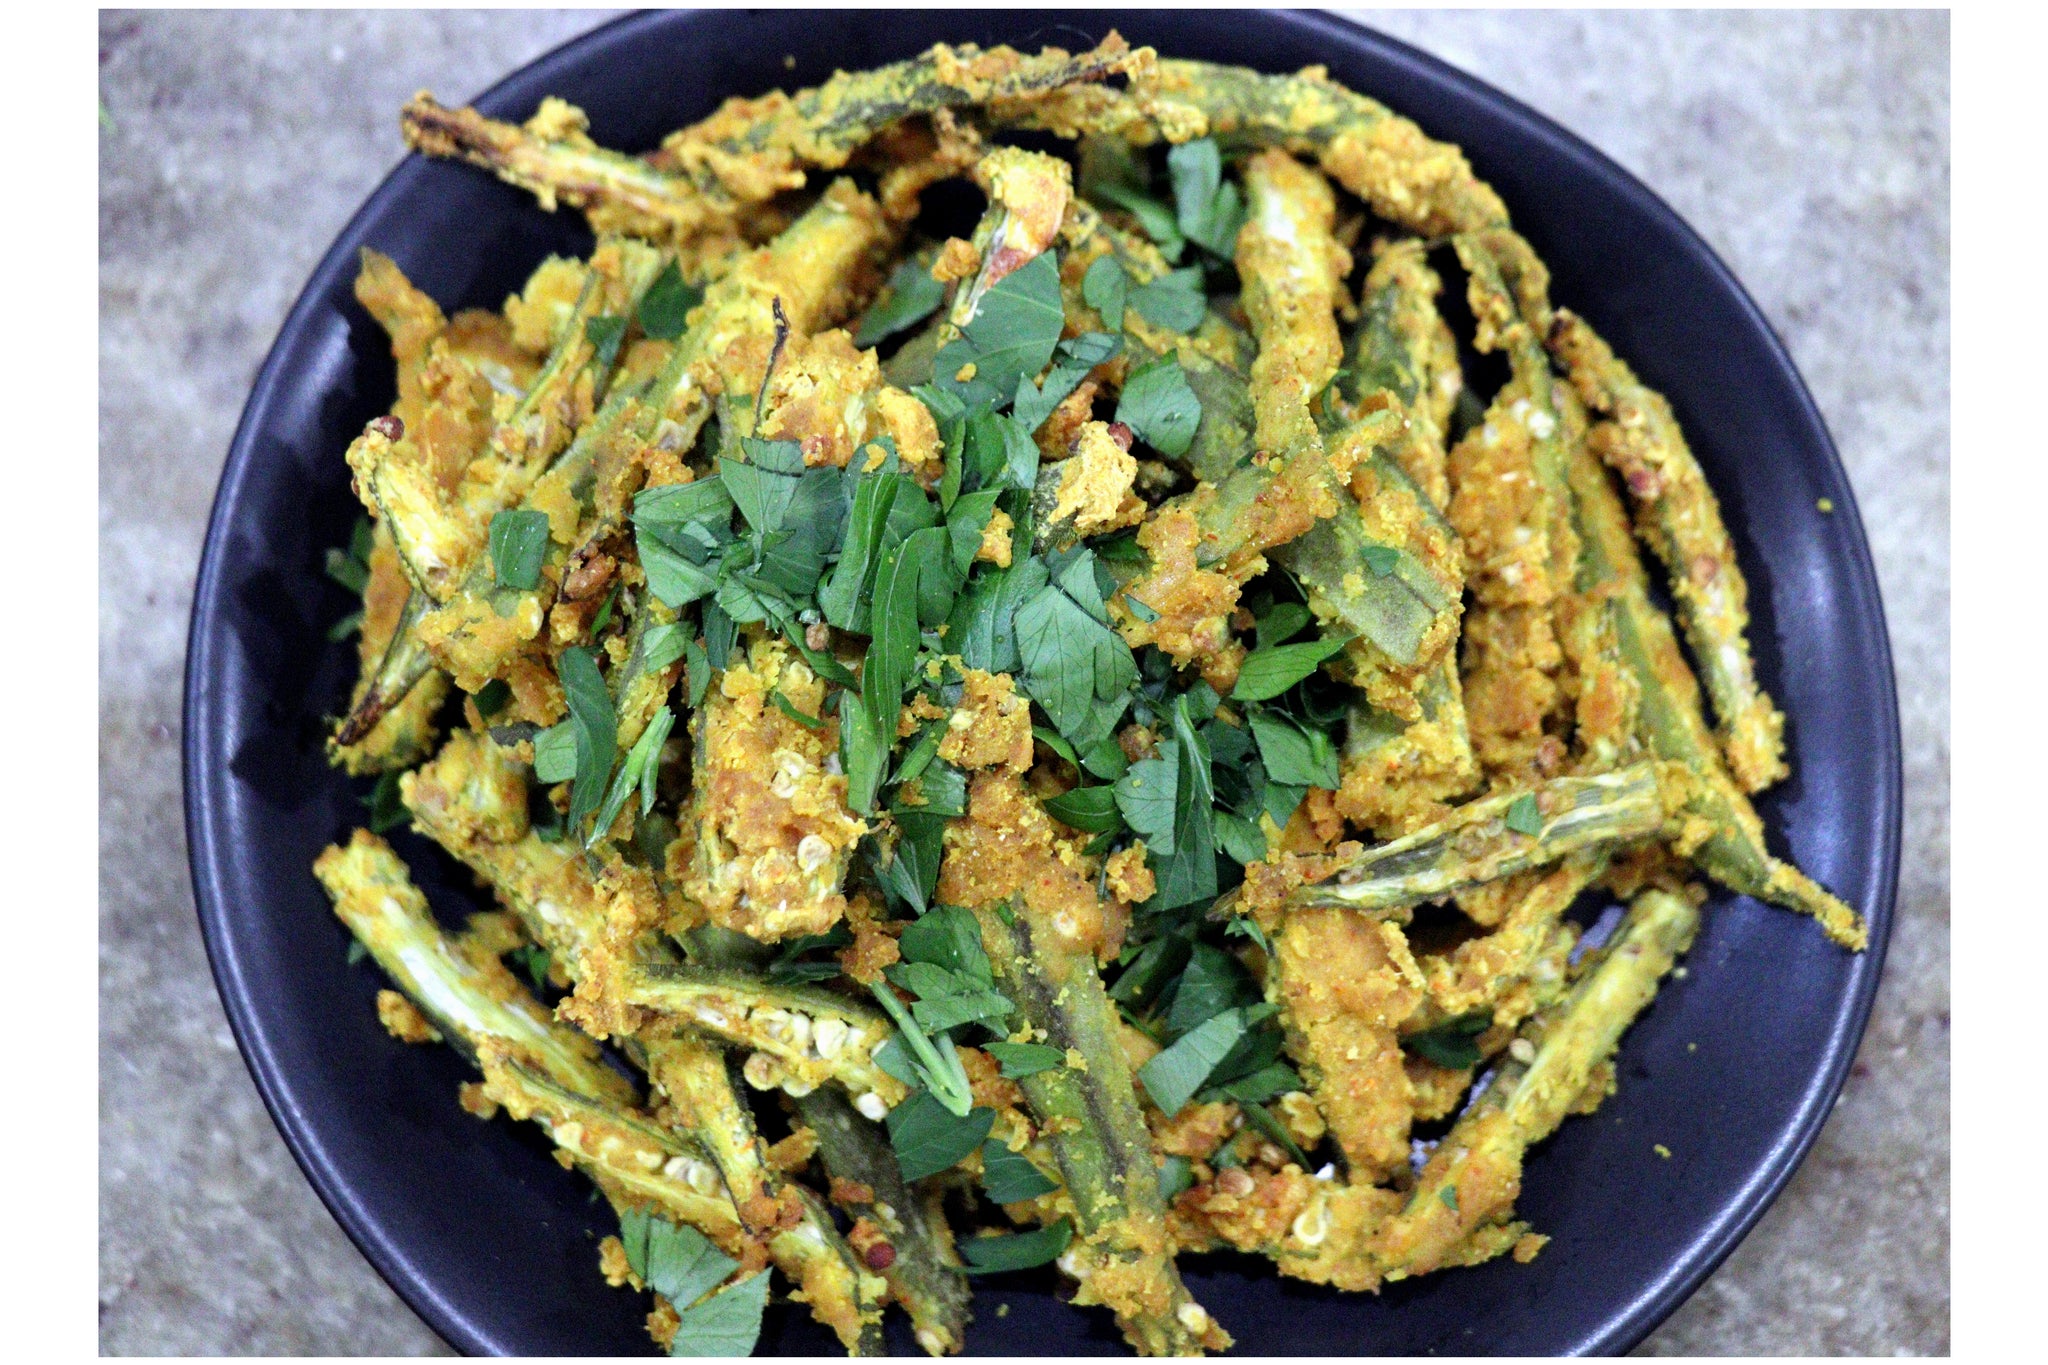 Baked Okra with Besan (chickpea) flour